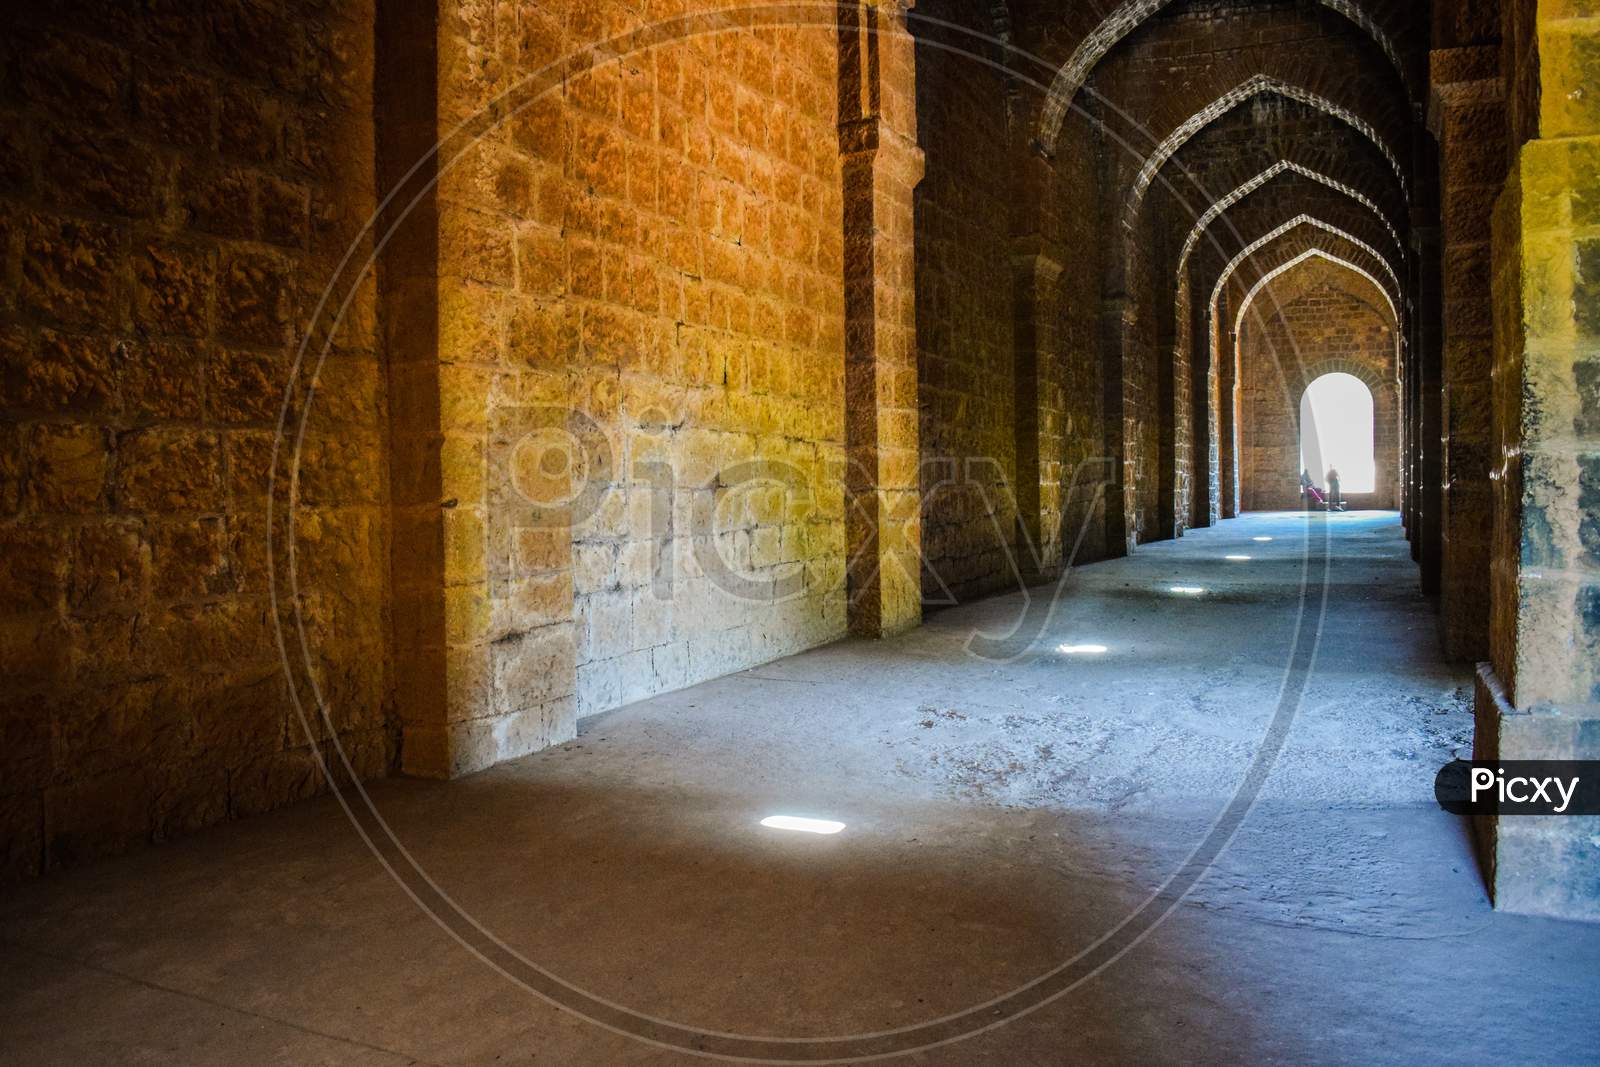 Inside View Of Ancient Panhala Fort In Kolhapur City India.